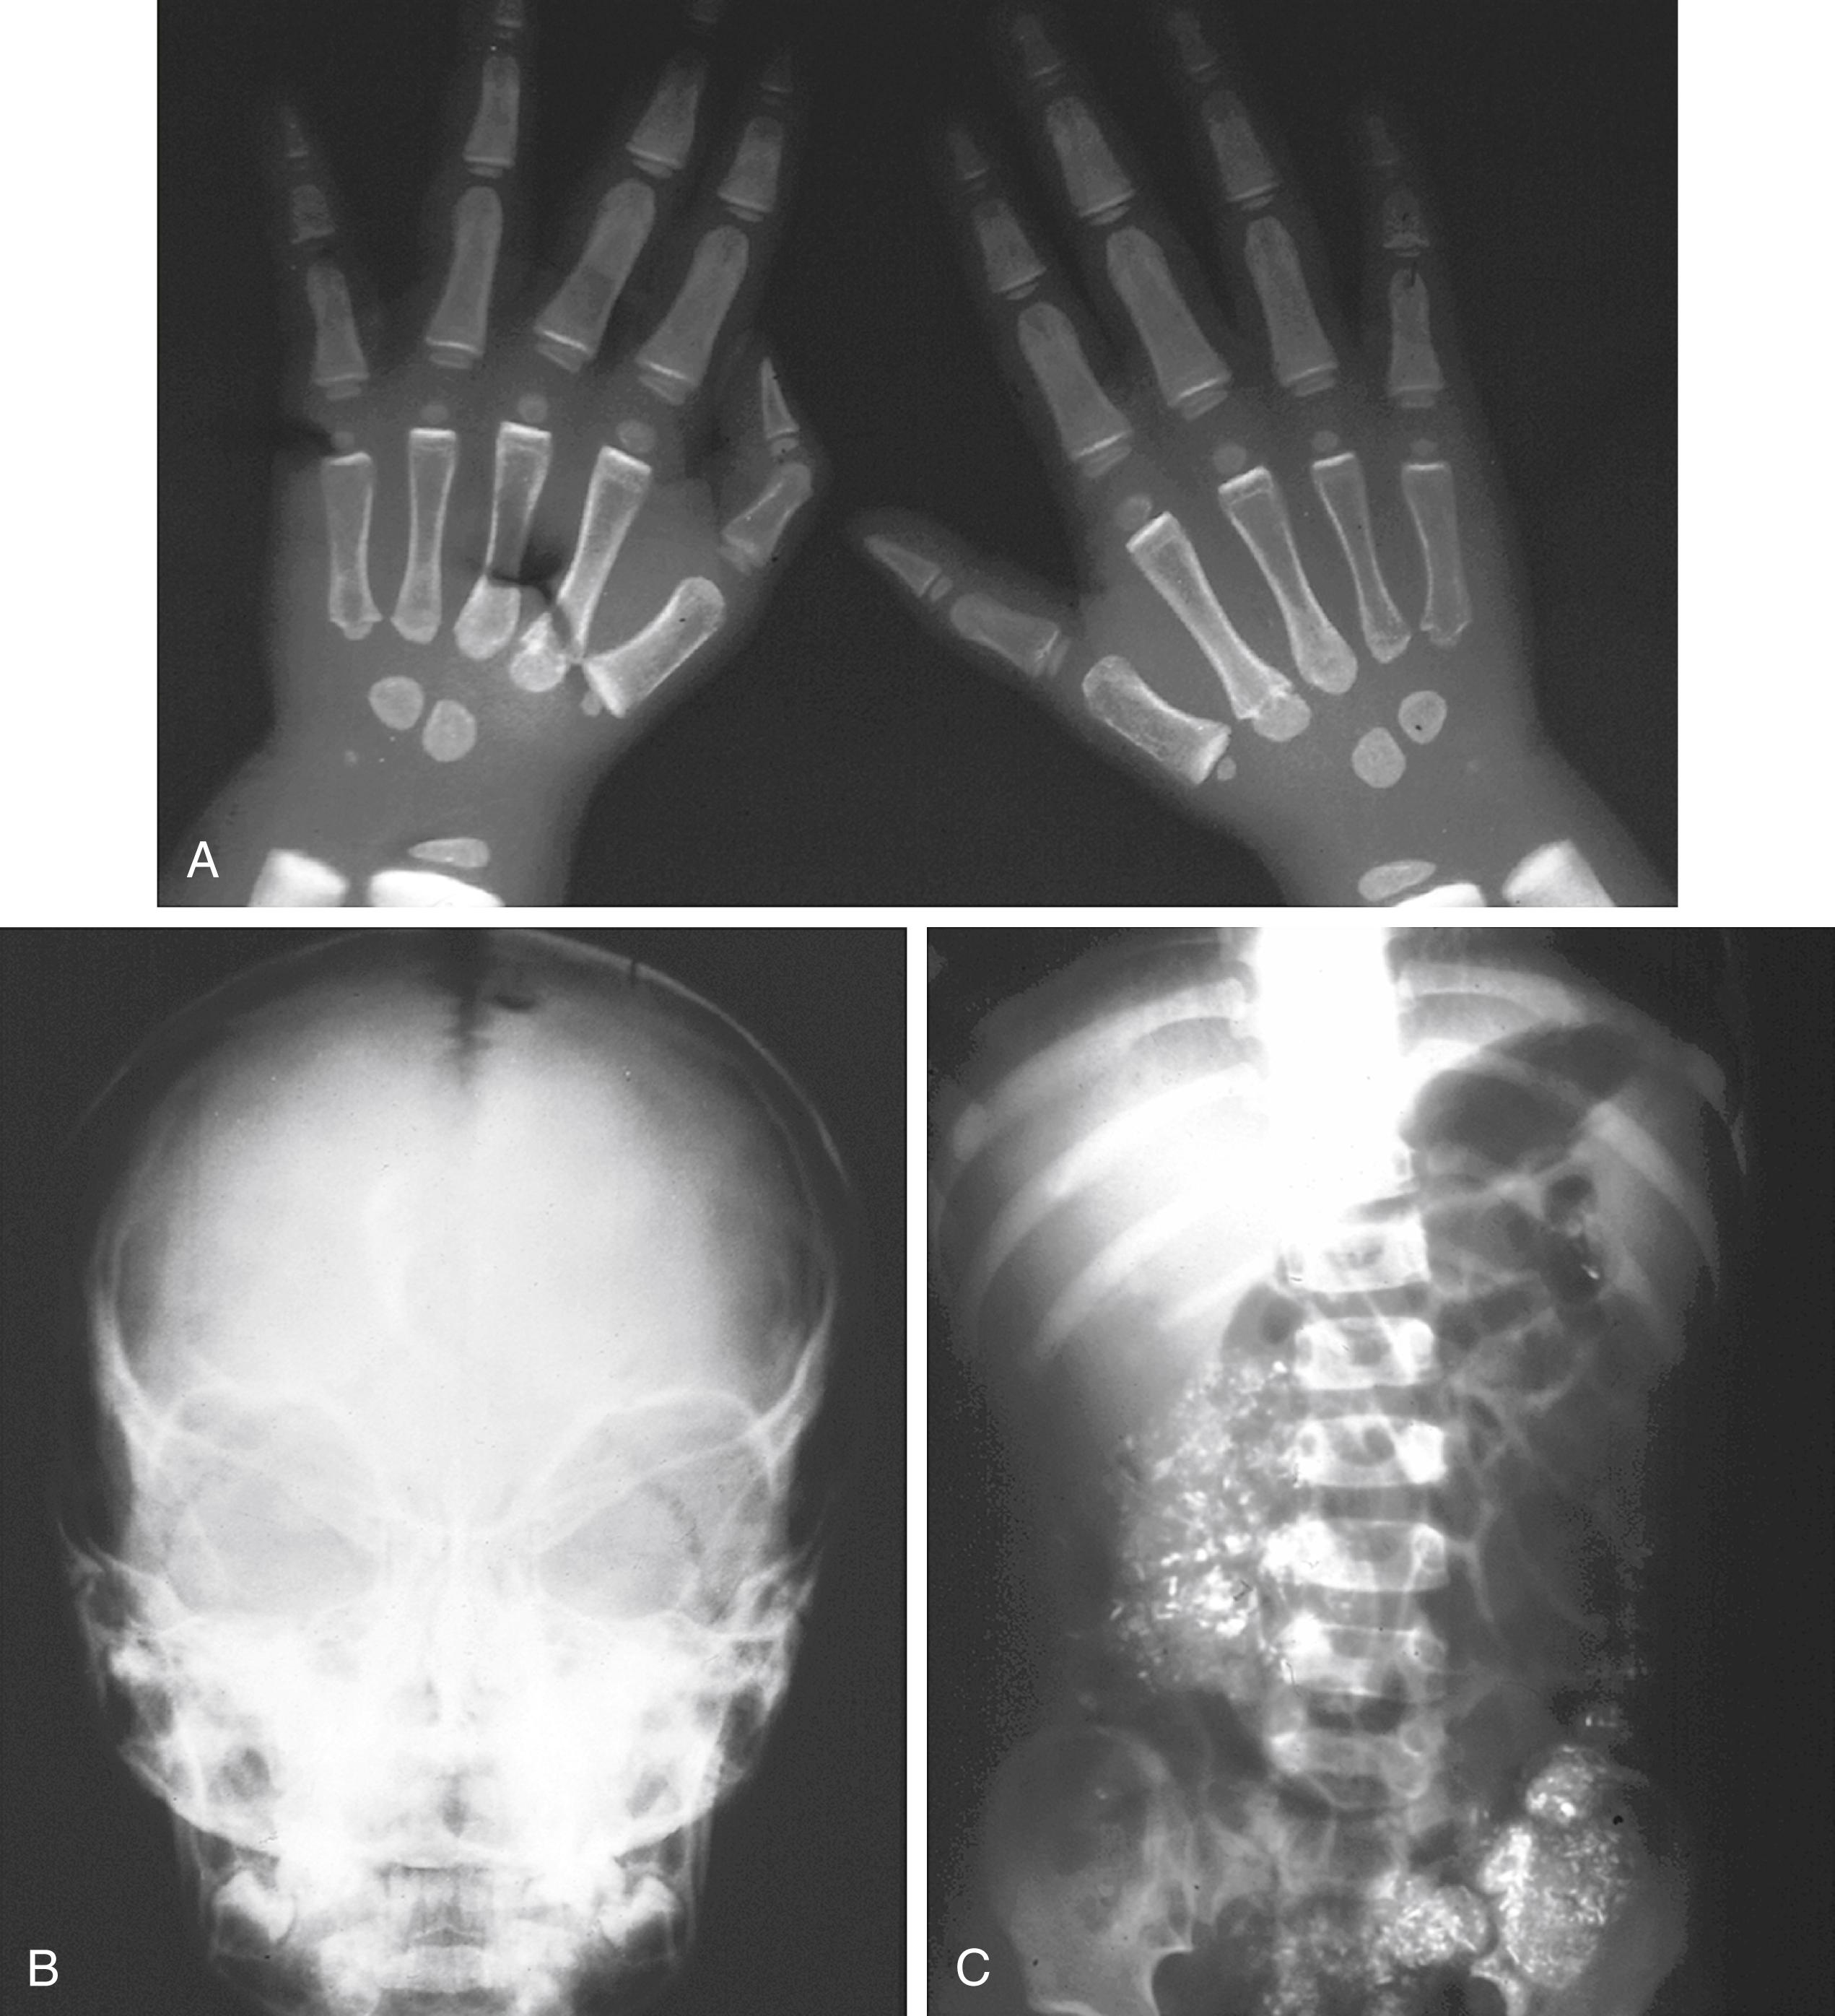 Fig. 12.7, X-ray findings in lead intoxication. (A) This hand radiograph of a child with lead intoxication reveals marked linear increases in the density of the metaphyses. These should not be confused with the growth arrest lines that may be seen after a variety of illnesses. (B) A skull film is shown of a patient with lead intoxication and encephalopathy. Note the split of sutures indicative of increased intracranial pressure. (C) An abdominal radiograph performed on a child with a history of pica and lead intoxication reveals radiodense, lead-containing paint chips scattered throughout the colon.